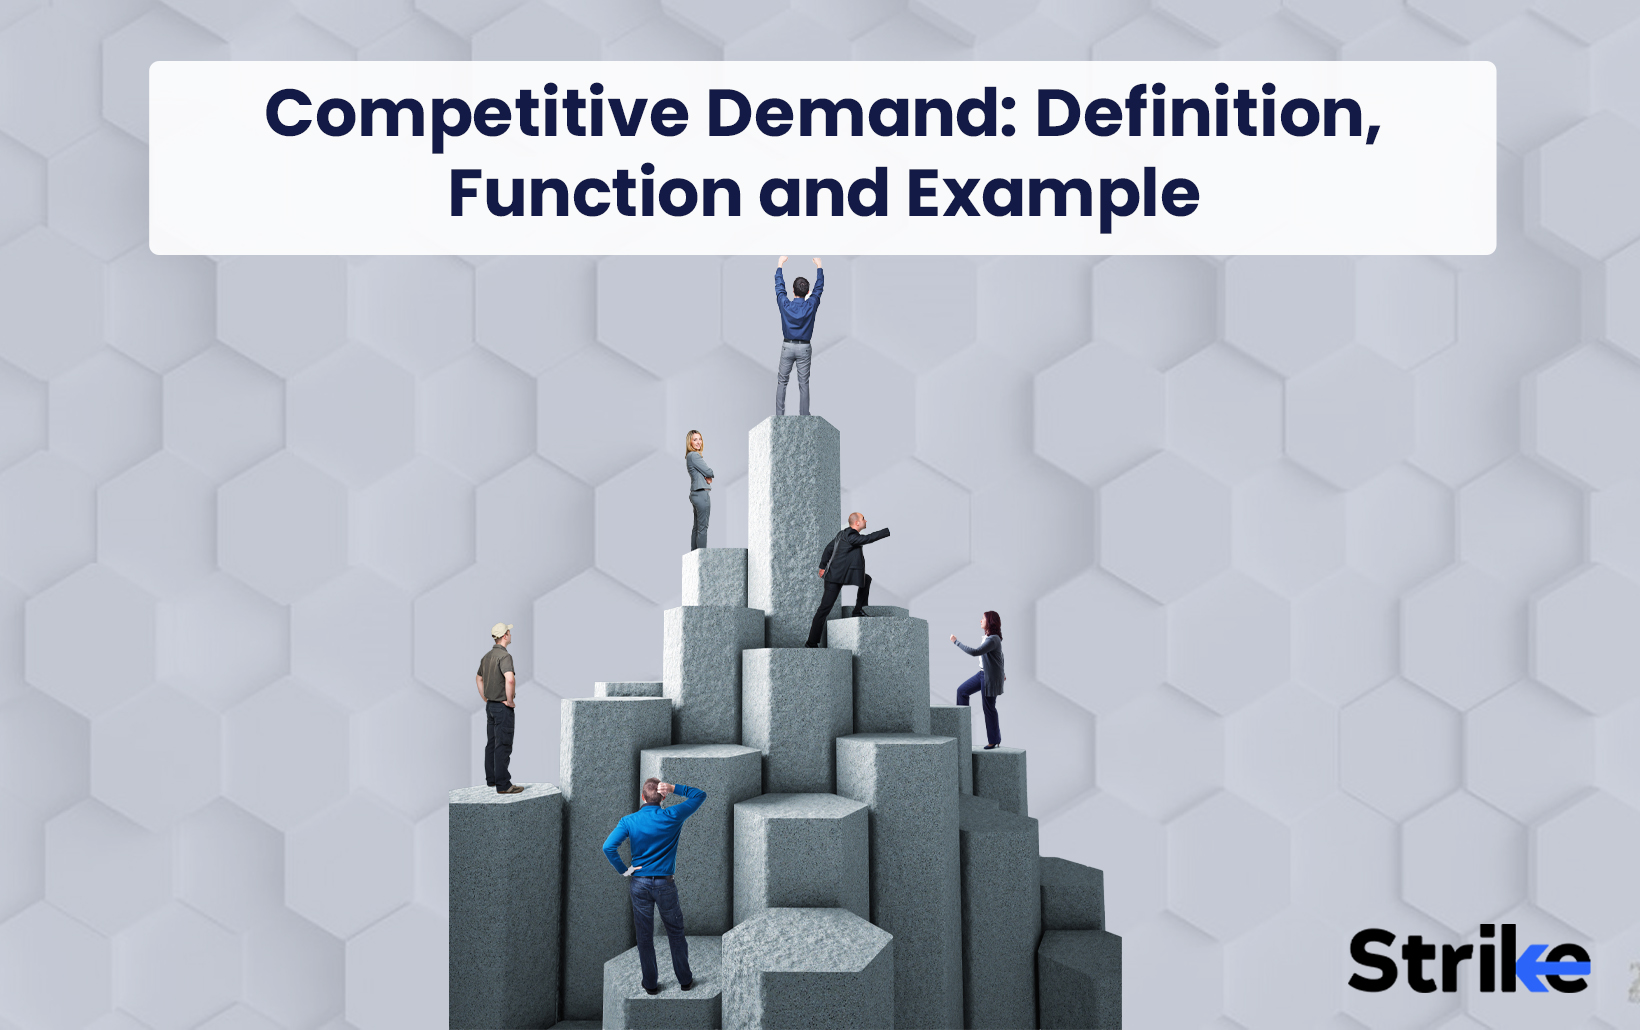 Competitive Demand: Definition, Function and Example